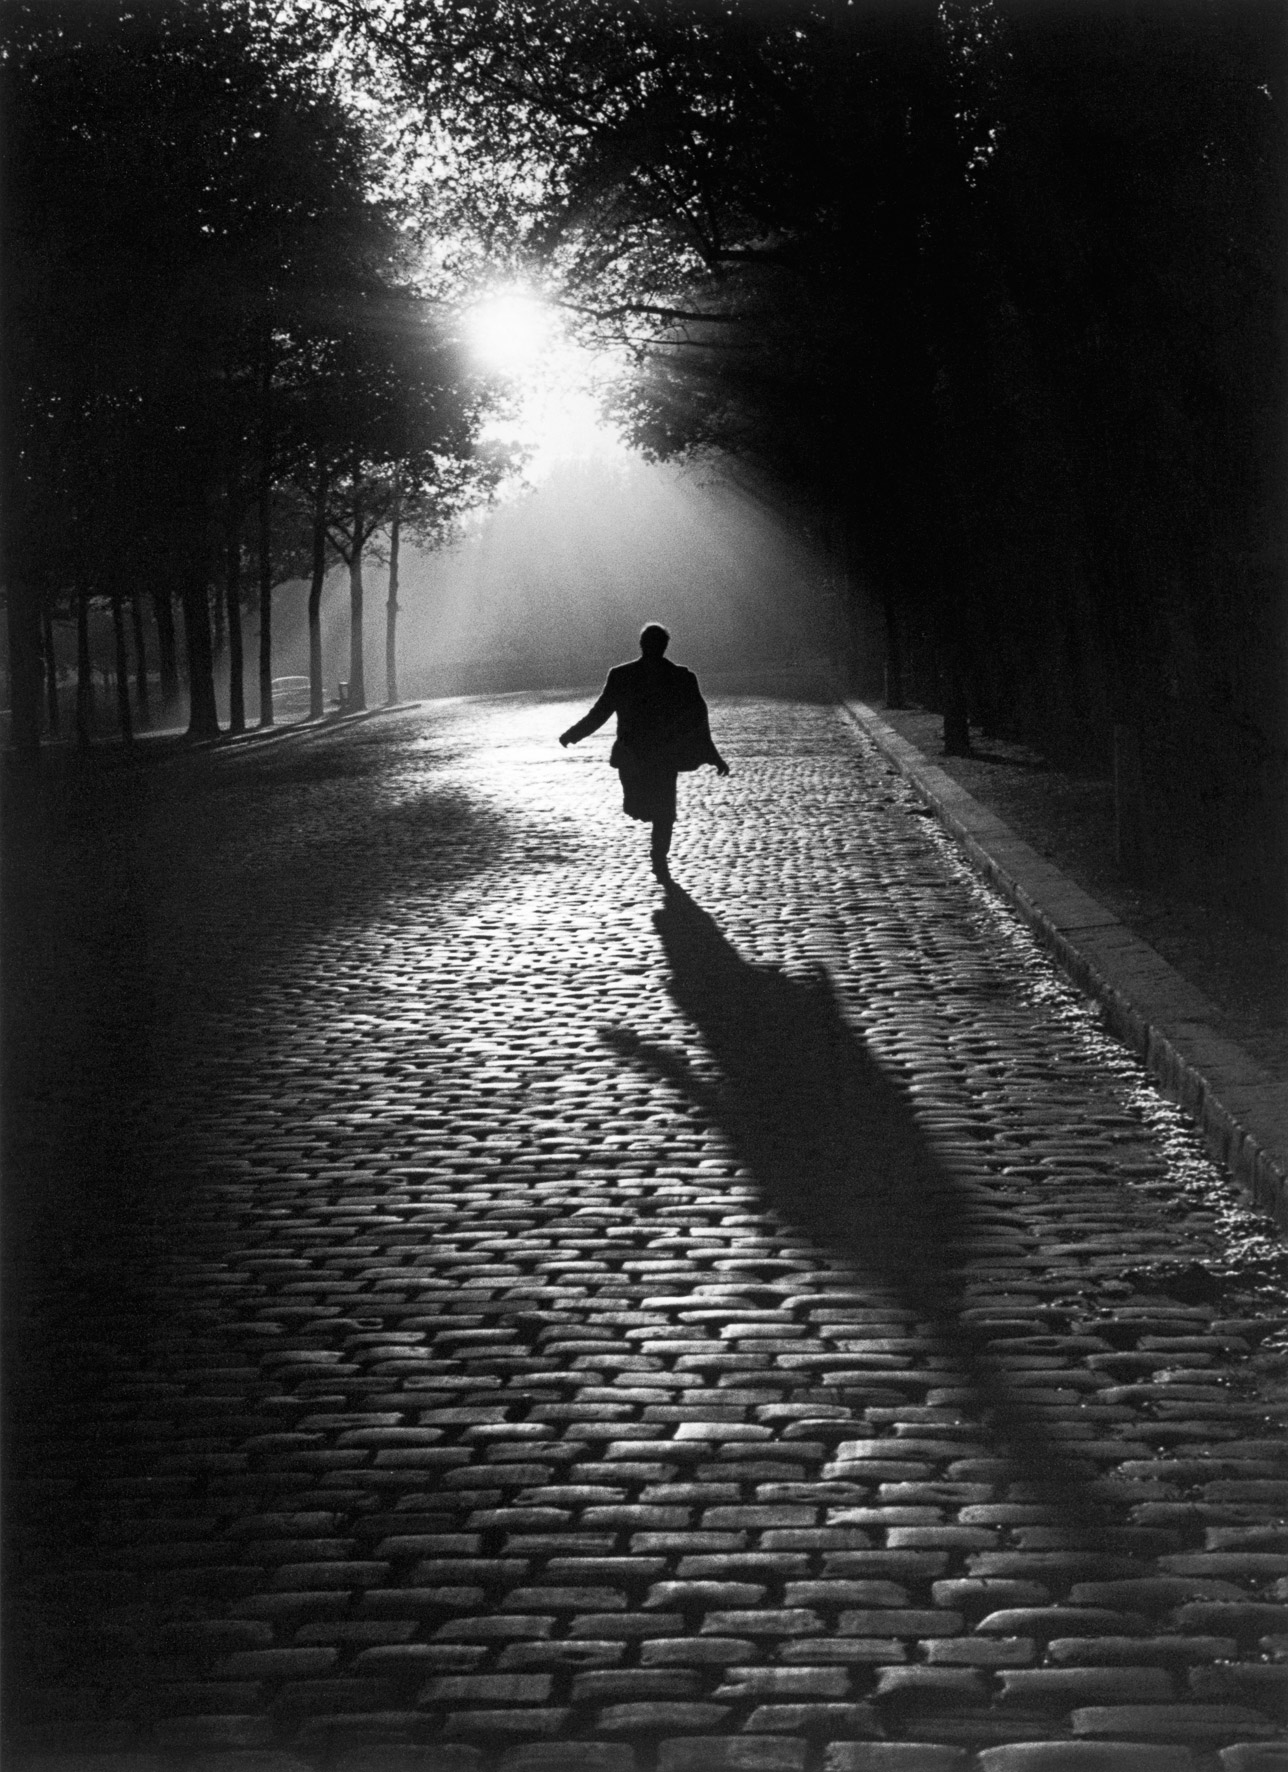 Sabine Weiss photo from the Jeu De Paume exhibition in Paris, France.